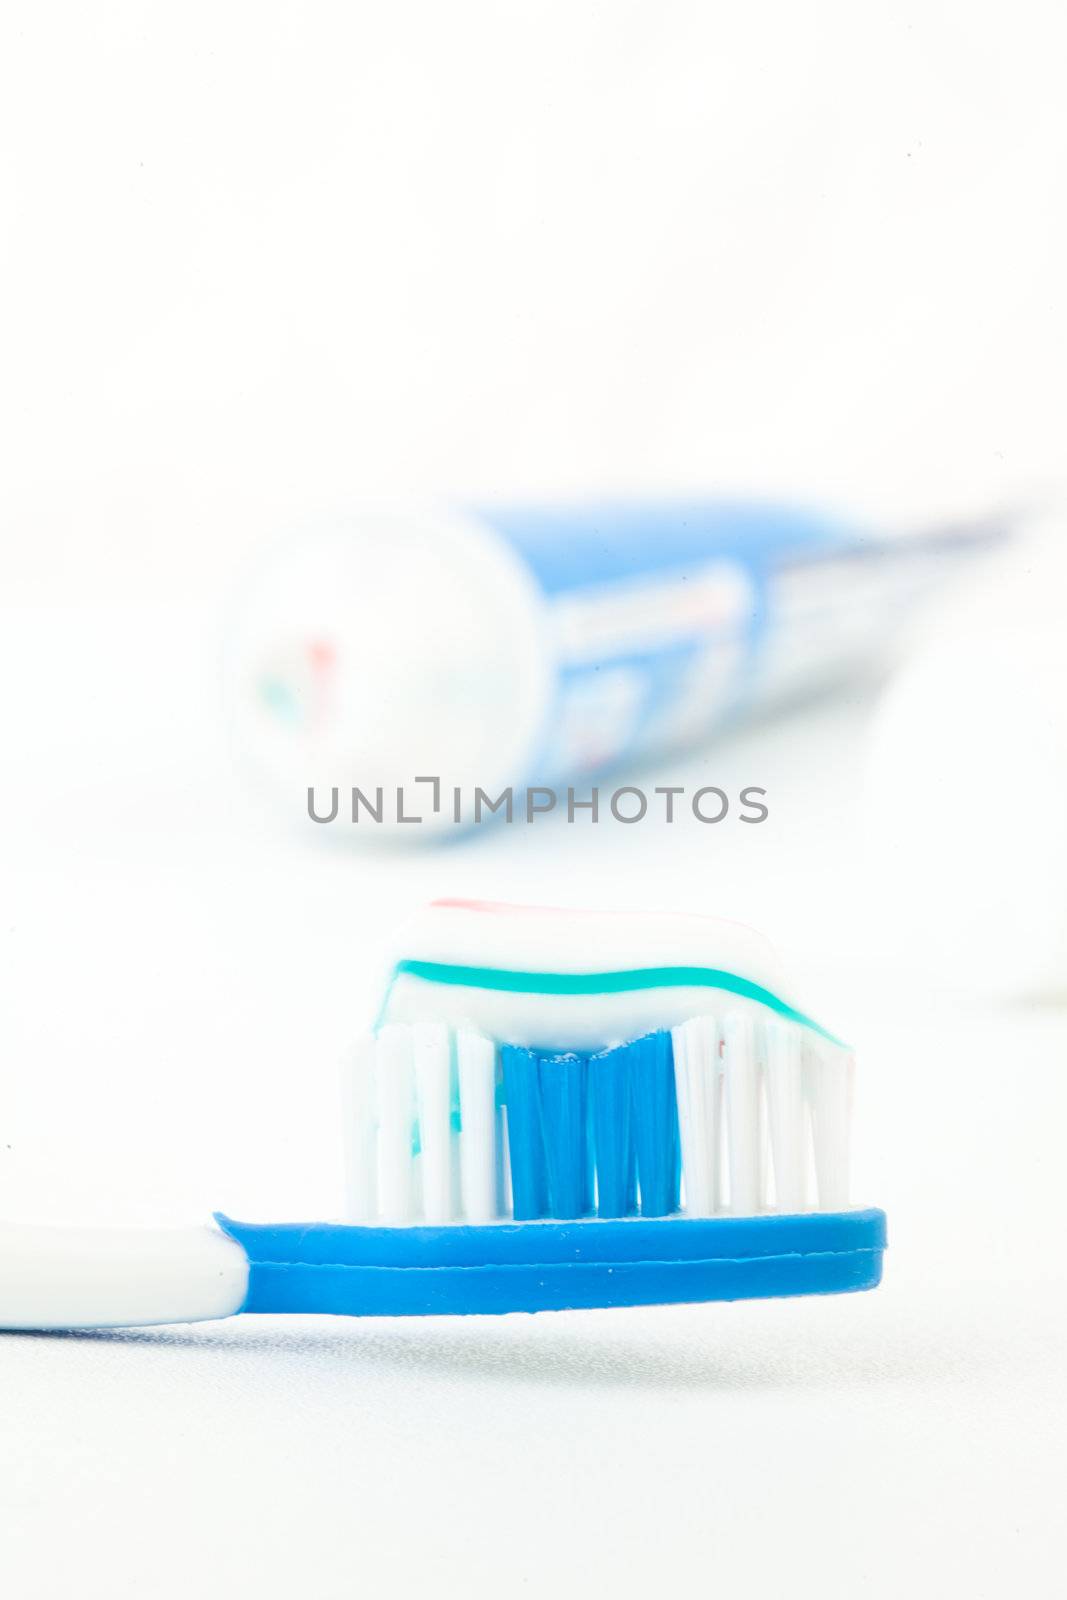 Tooth brush next to a tube of toothpaste by Wavebreakmedia